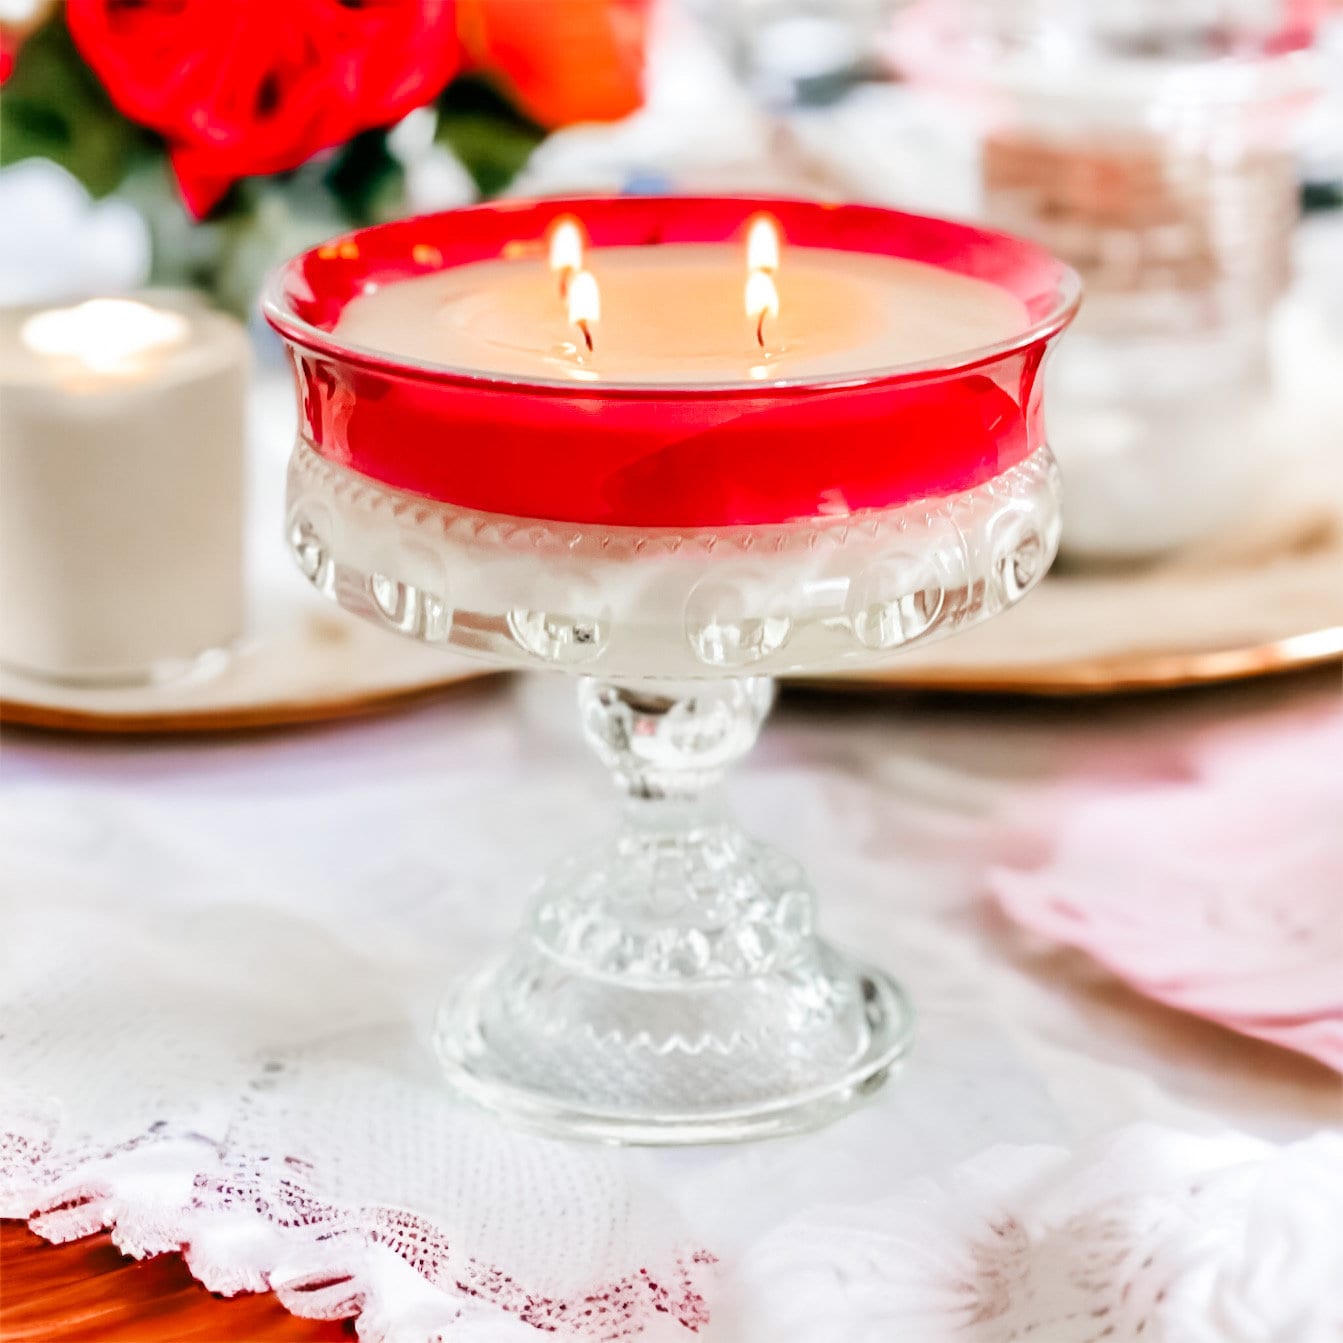 Scented Candle in Vintage Compote